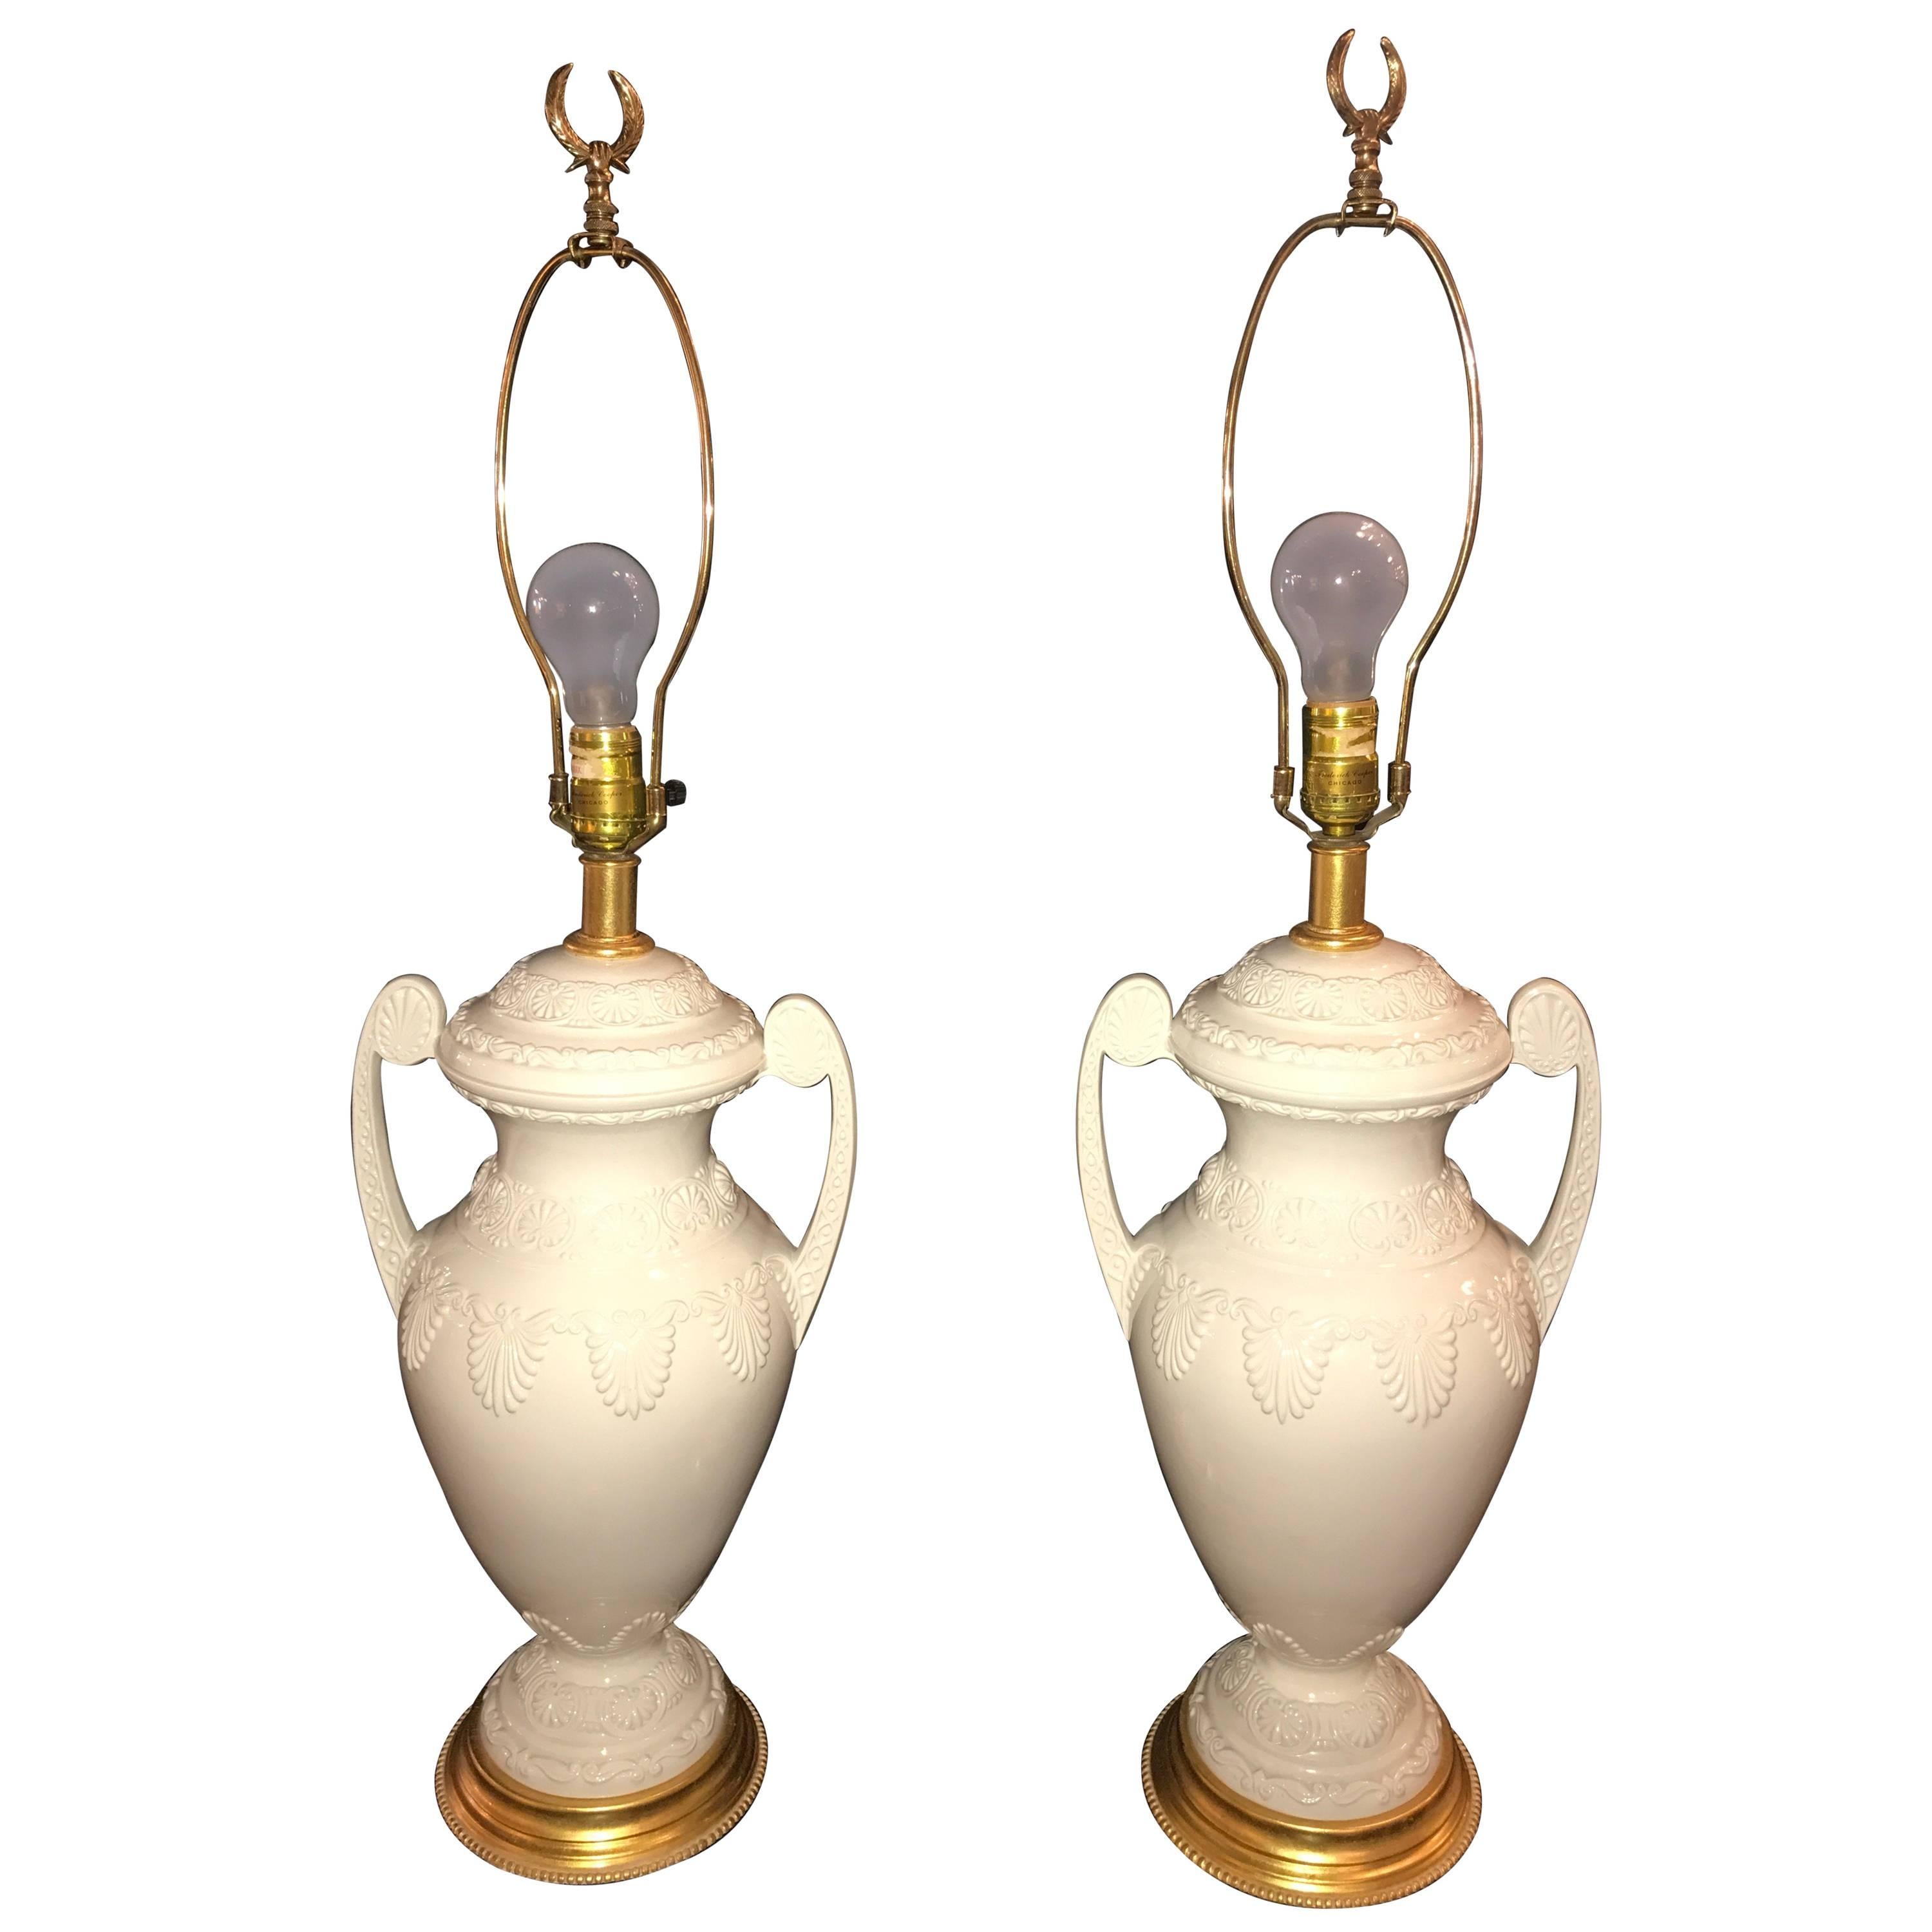 Pair of Lenox Neoclassical Style Table Lamps by Frederick Cooper